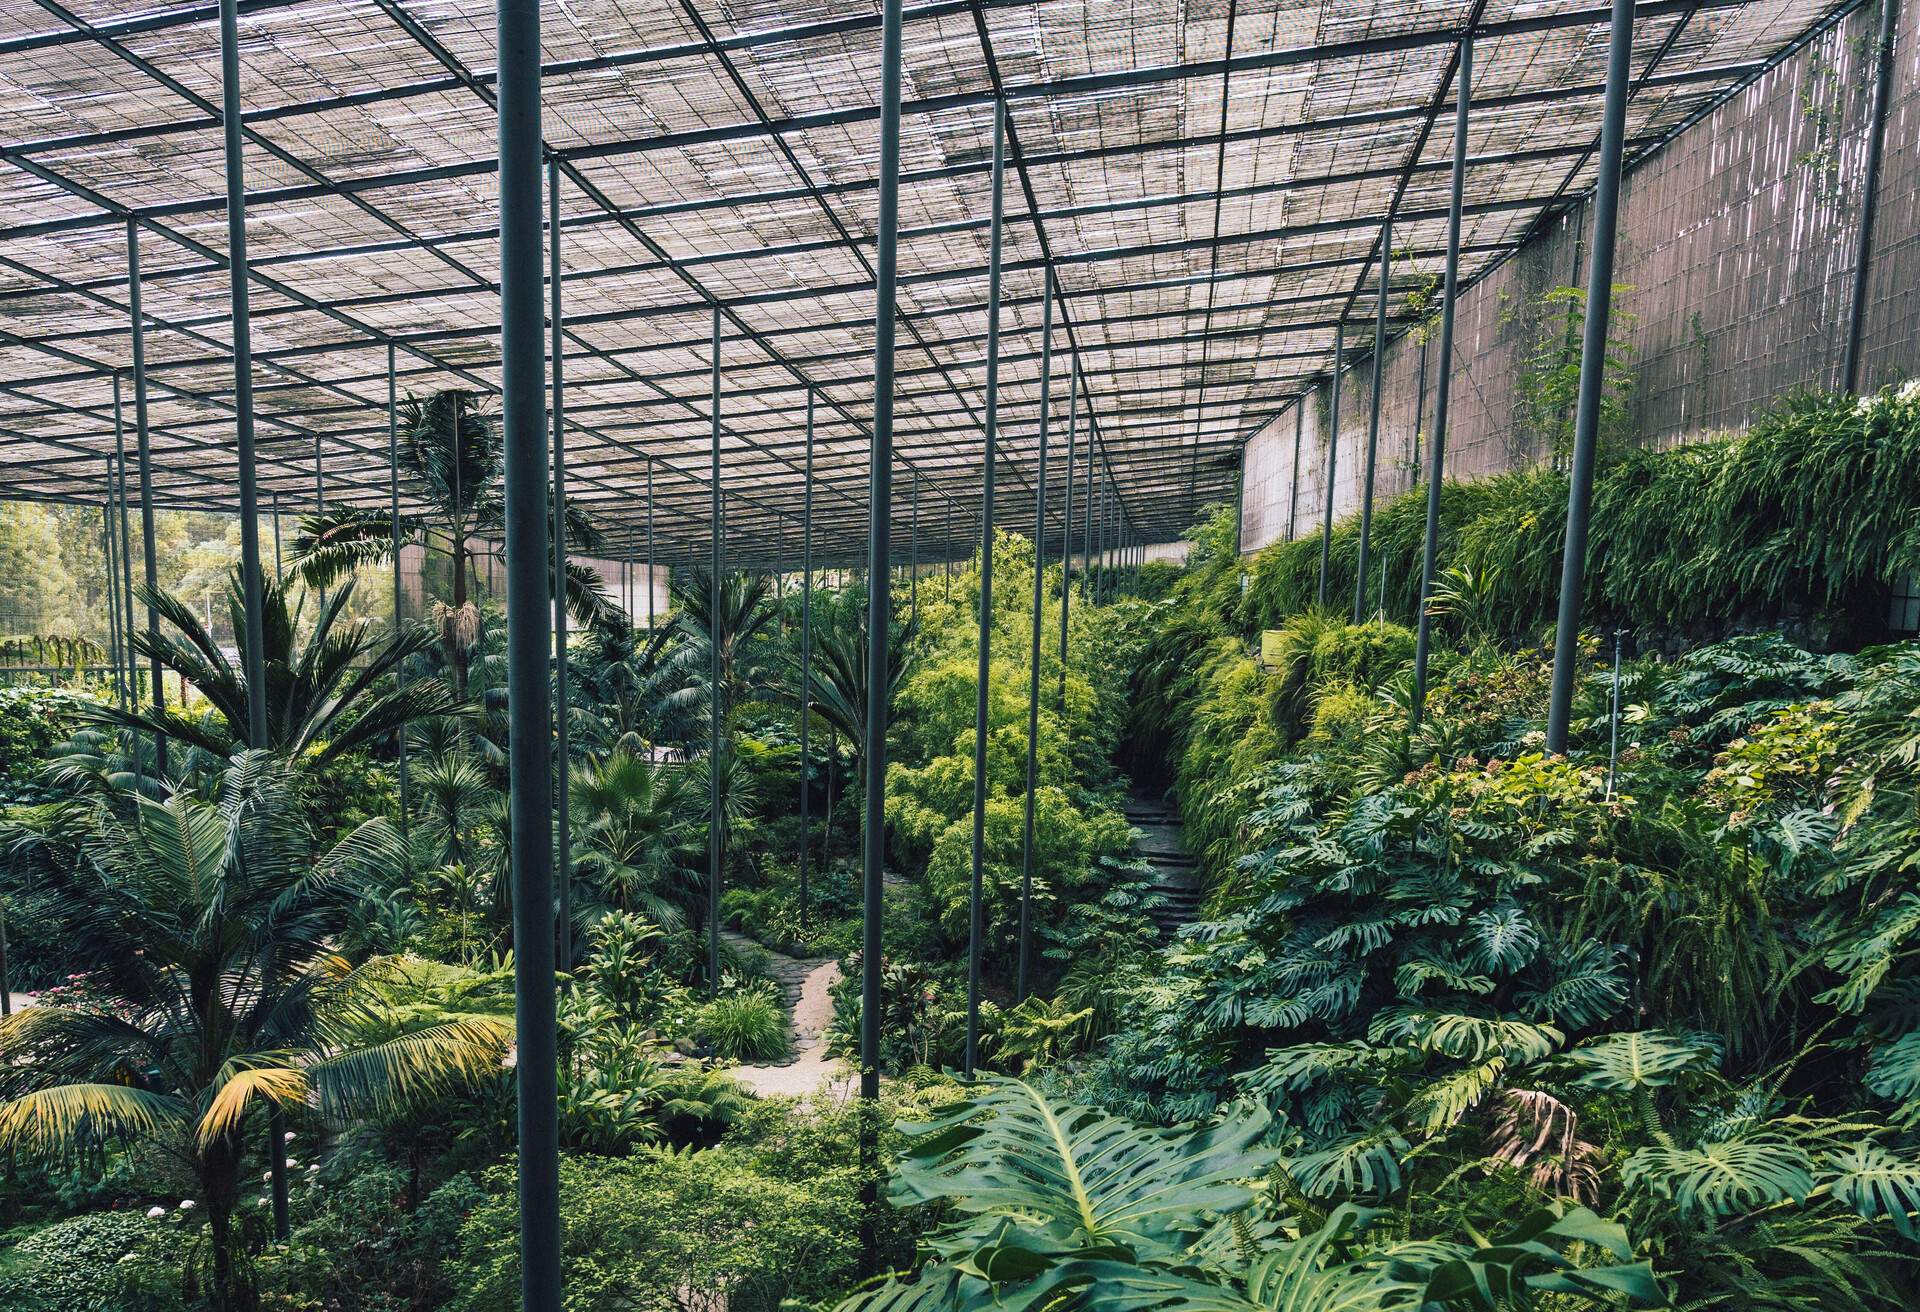 Greenhouse in botanical garden in Lisbon, Portugal. Plants and trees in hot and humid environment.